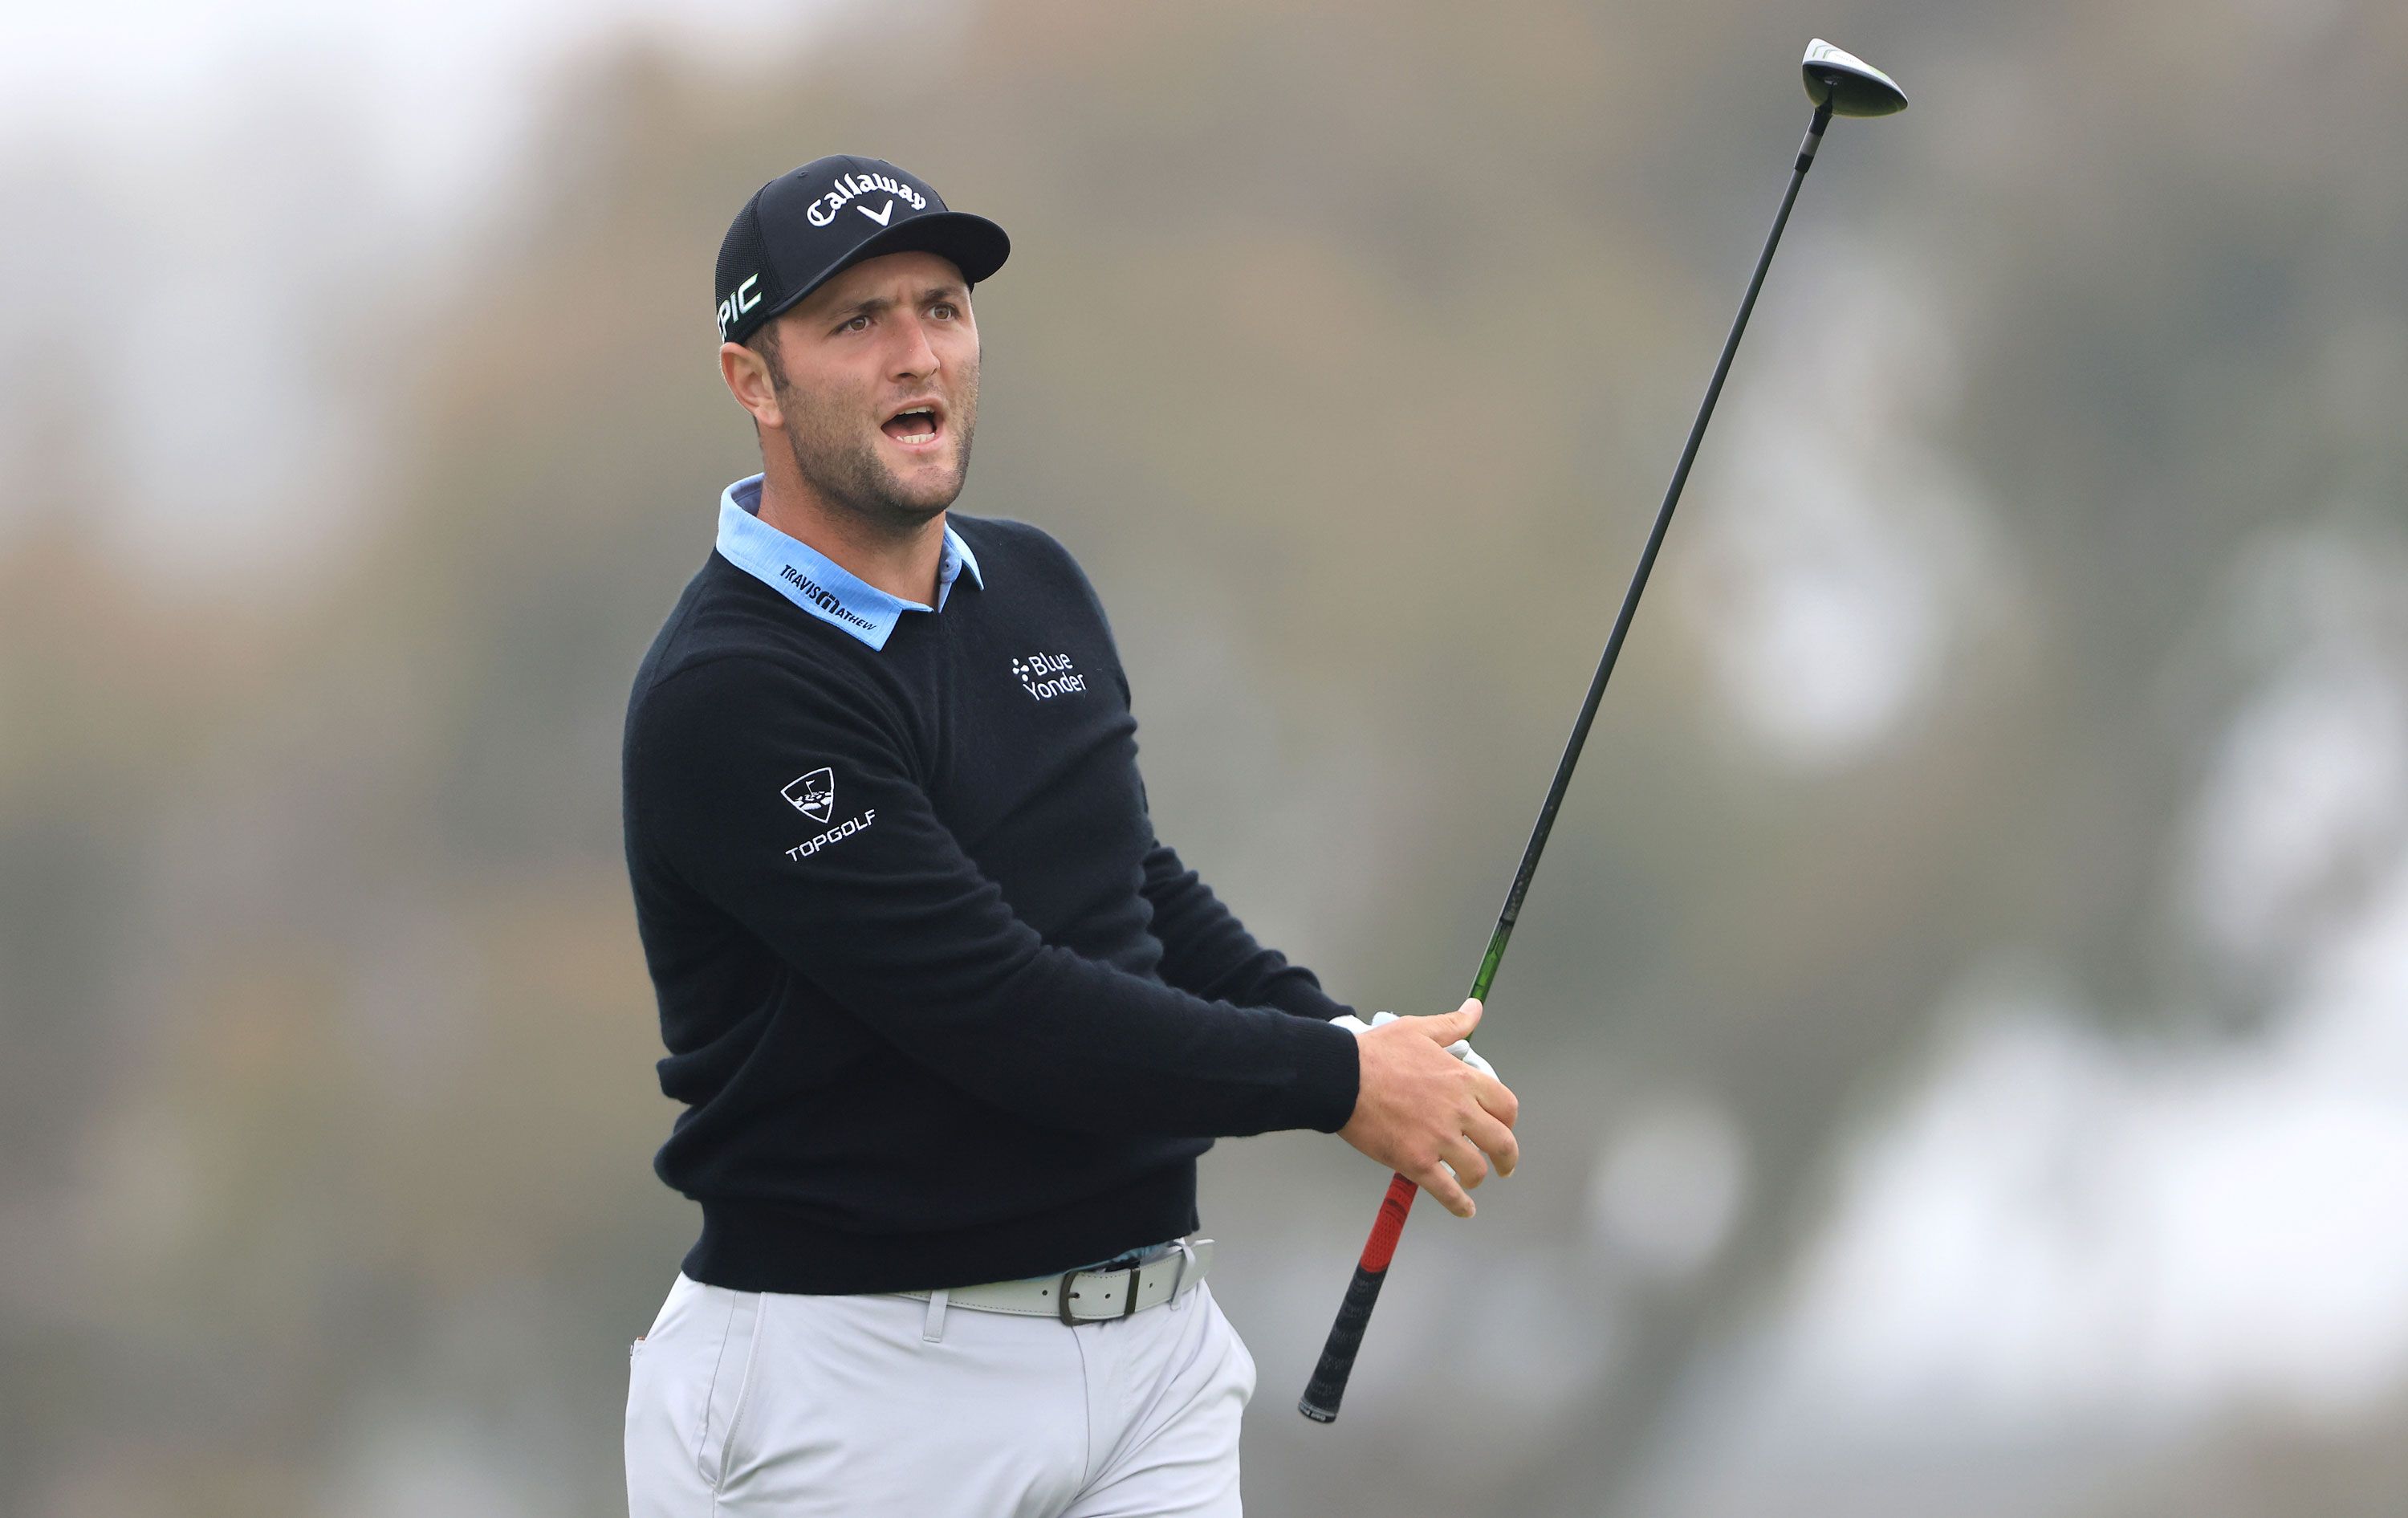 U.S. Open 2021: Jon Rahm got the perspective no one wants, but it may be what wins him a major. Golf News and Tour Information